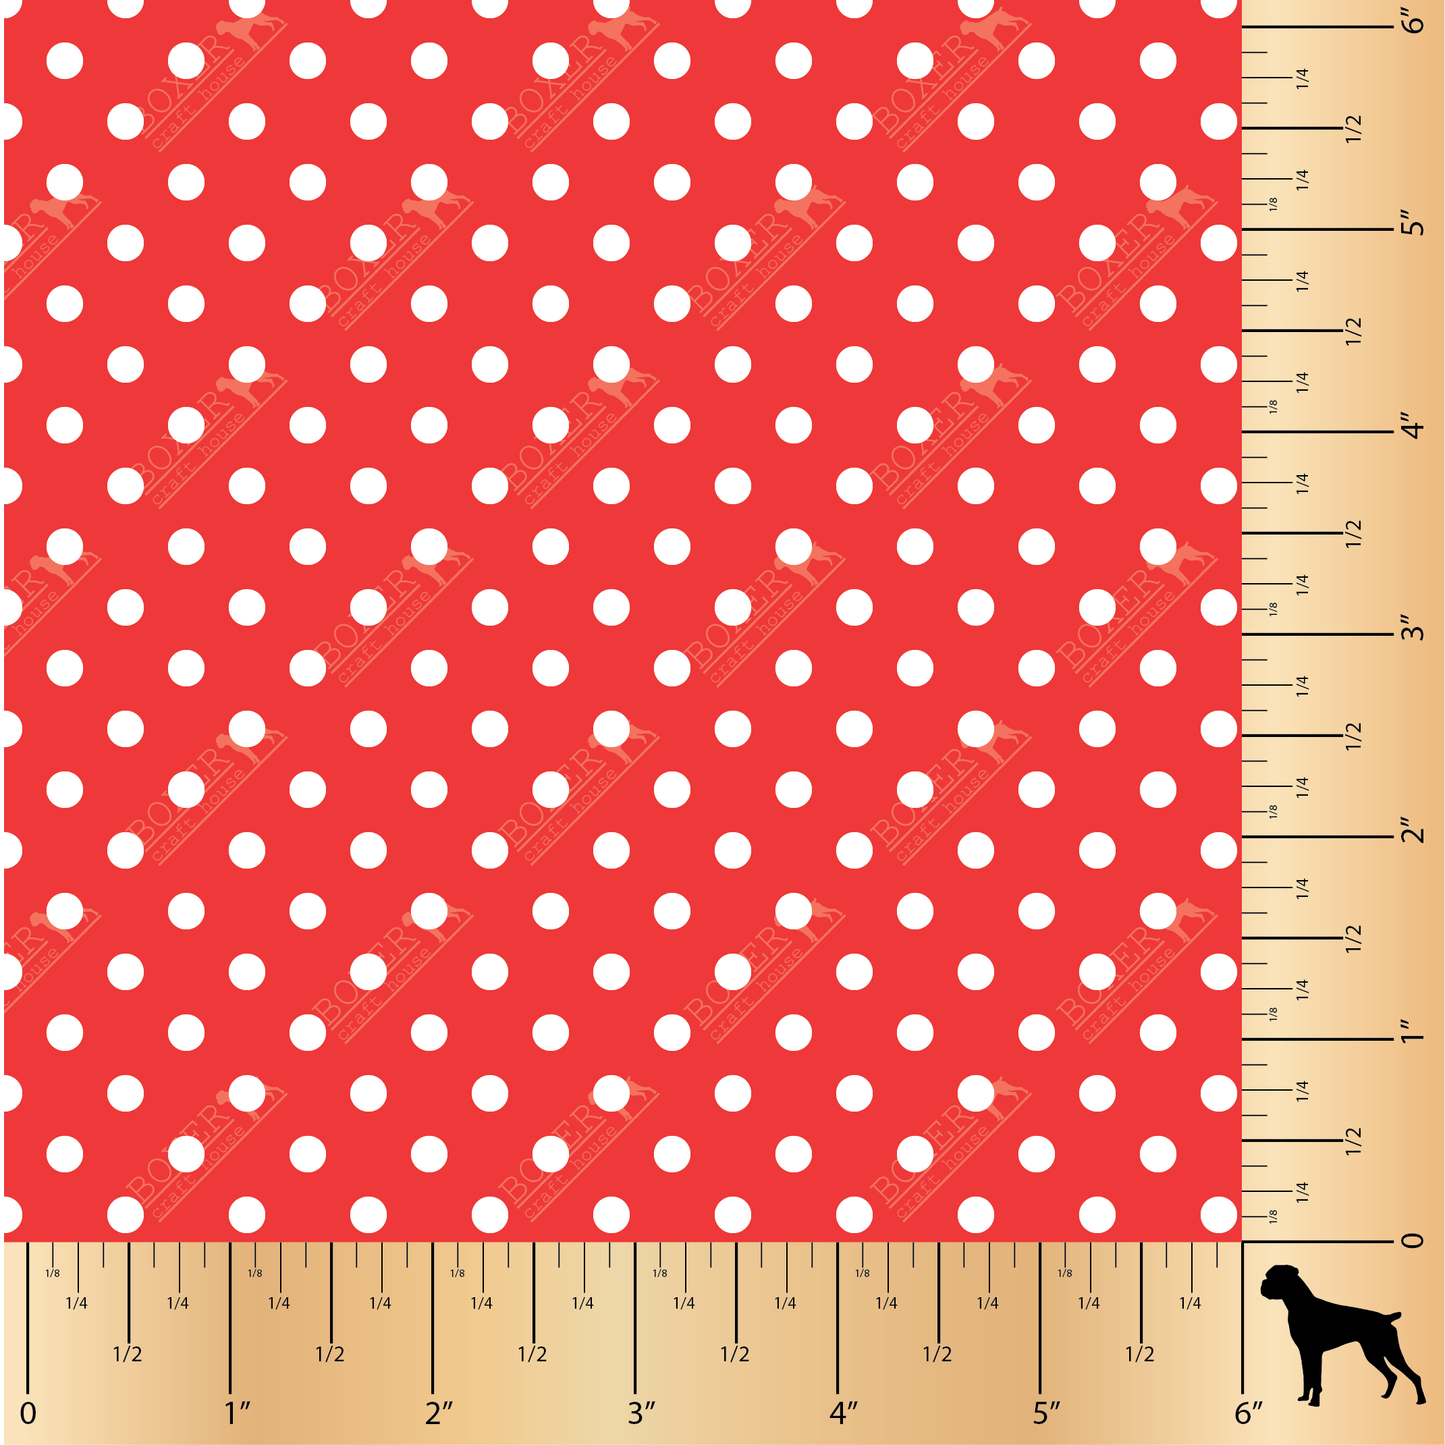 Dots 3/16" - Red